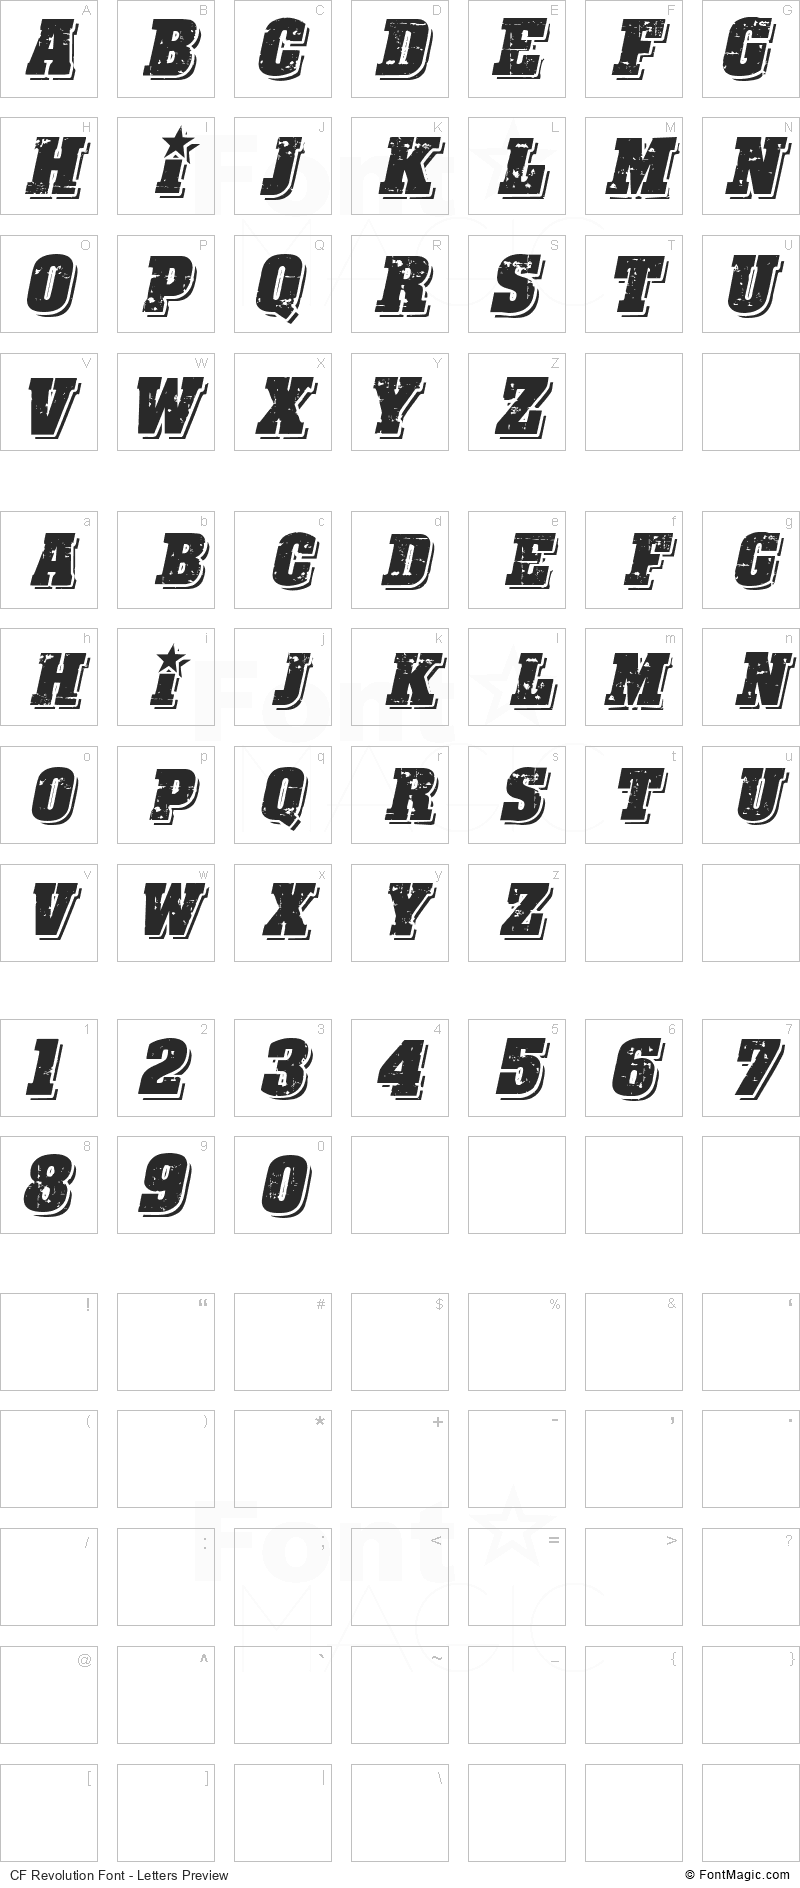 CF Revolution Font - All Latters Preview Chart